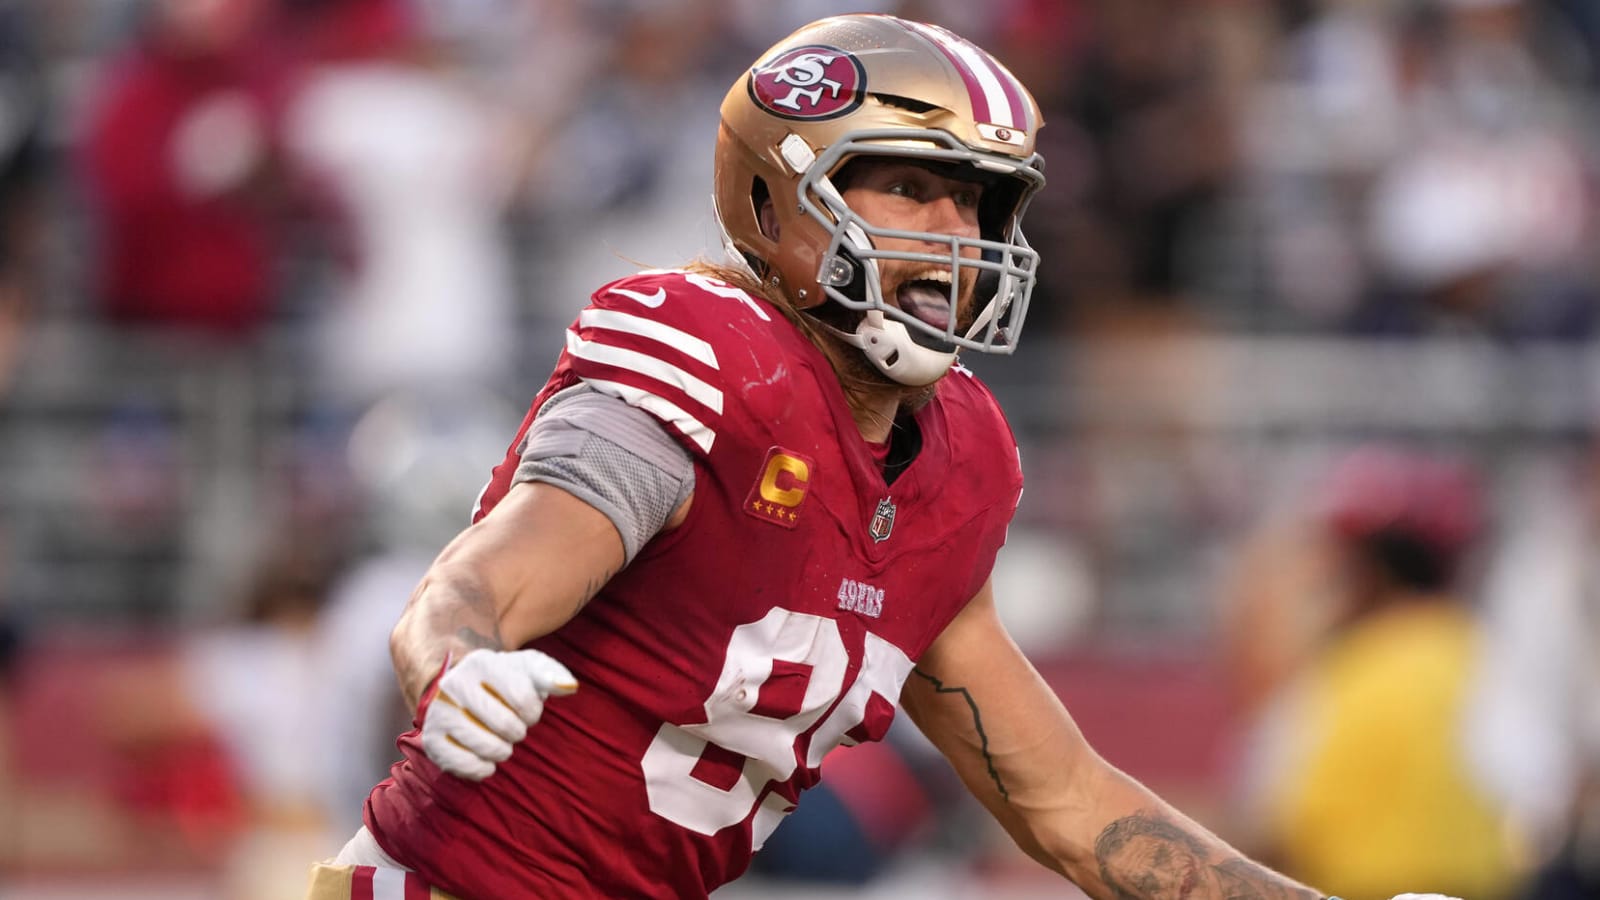 George Kittle may face NFL discipline over anti-Cowboys shirt